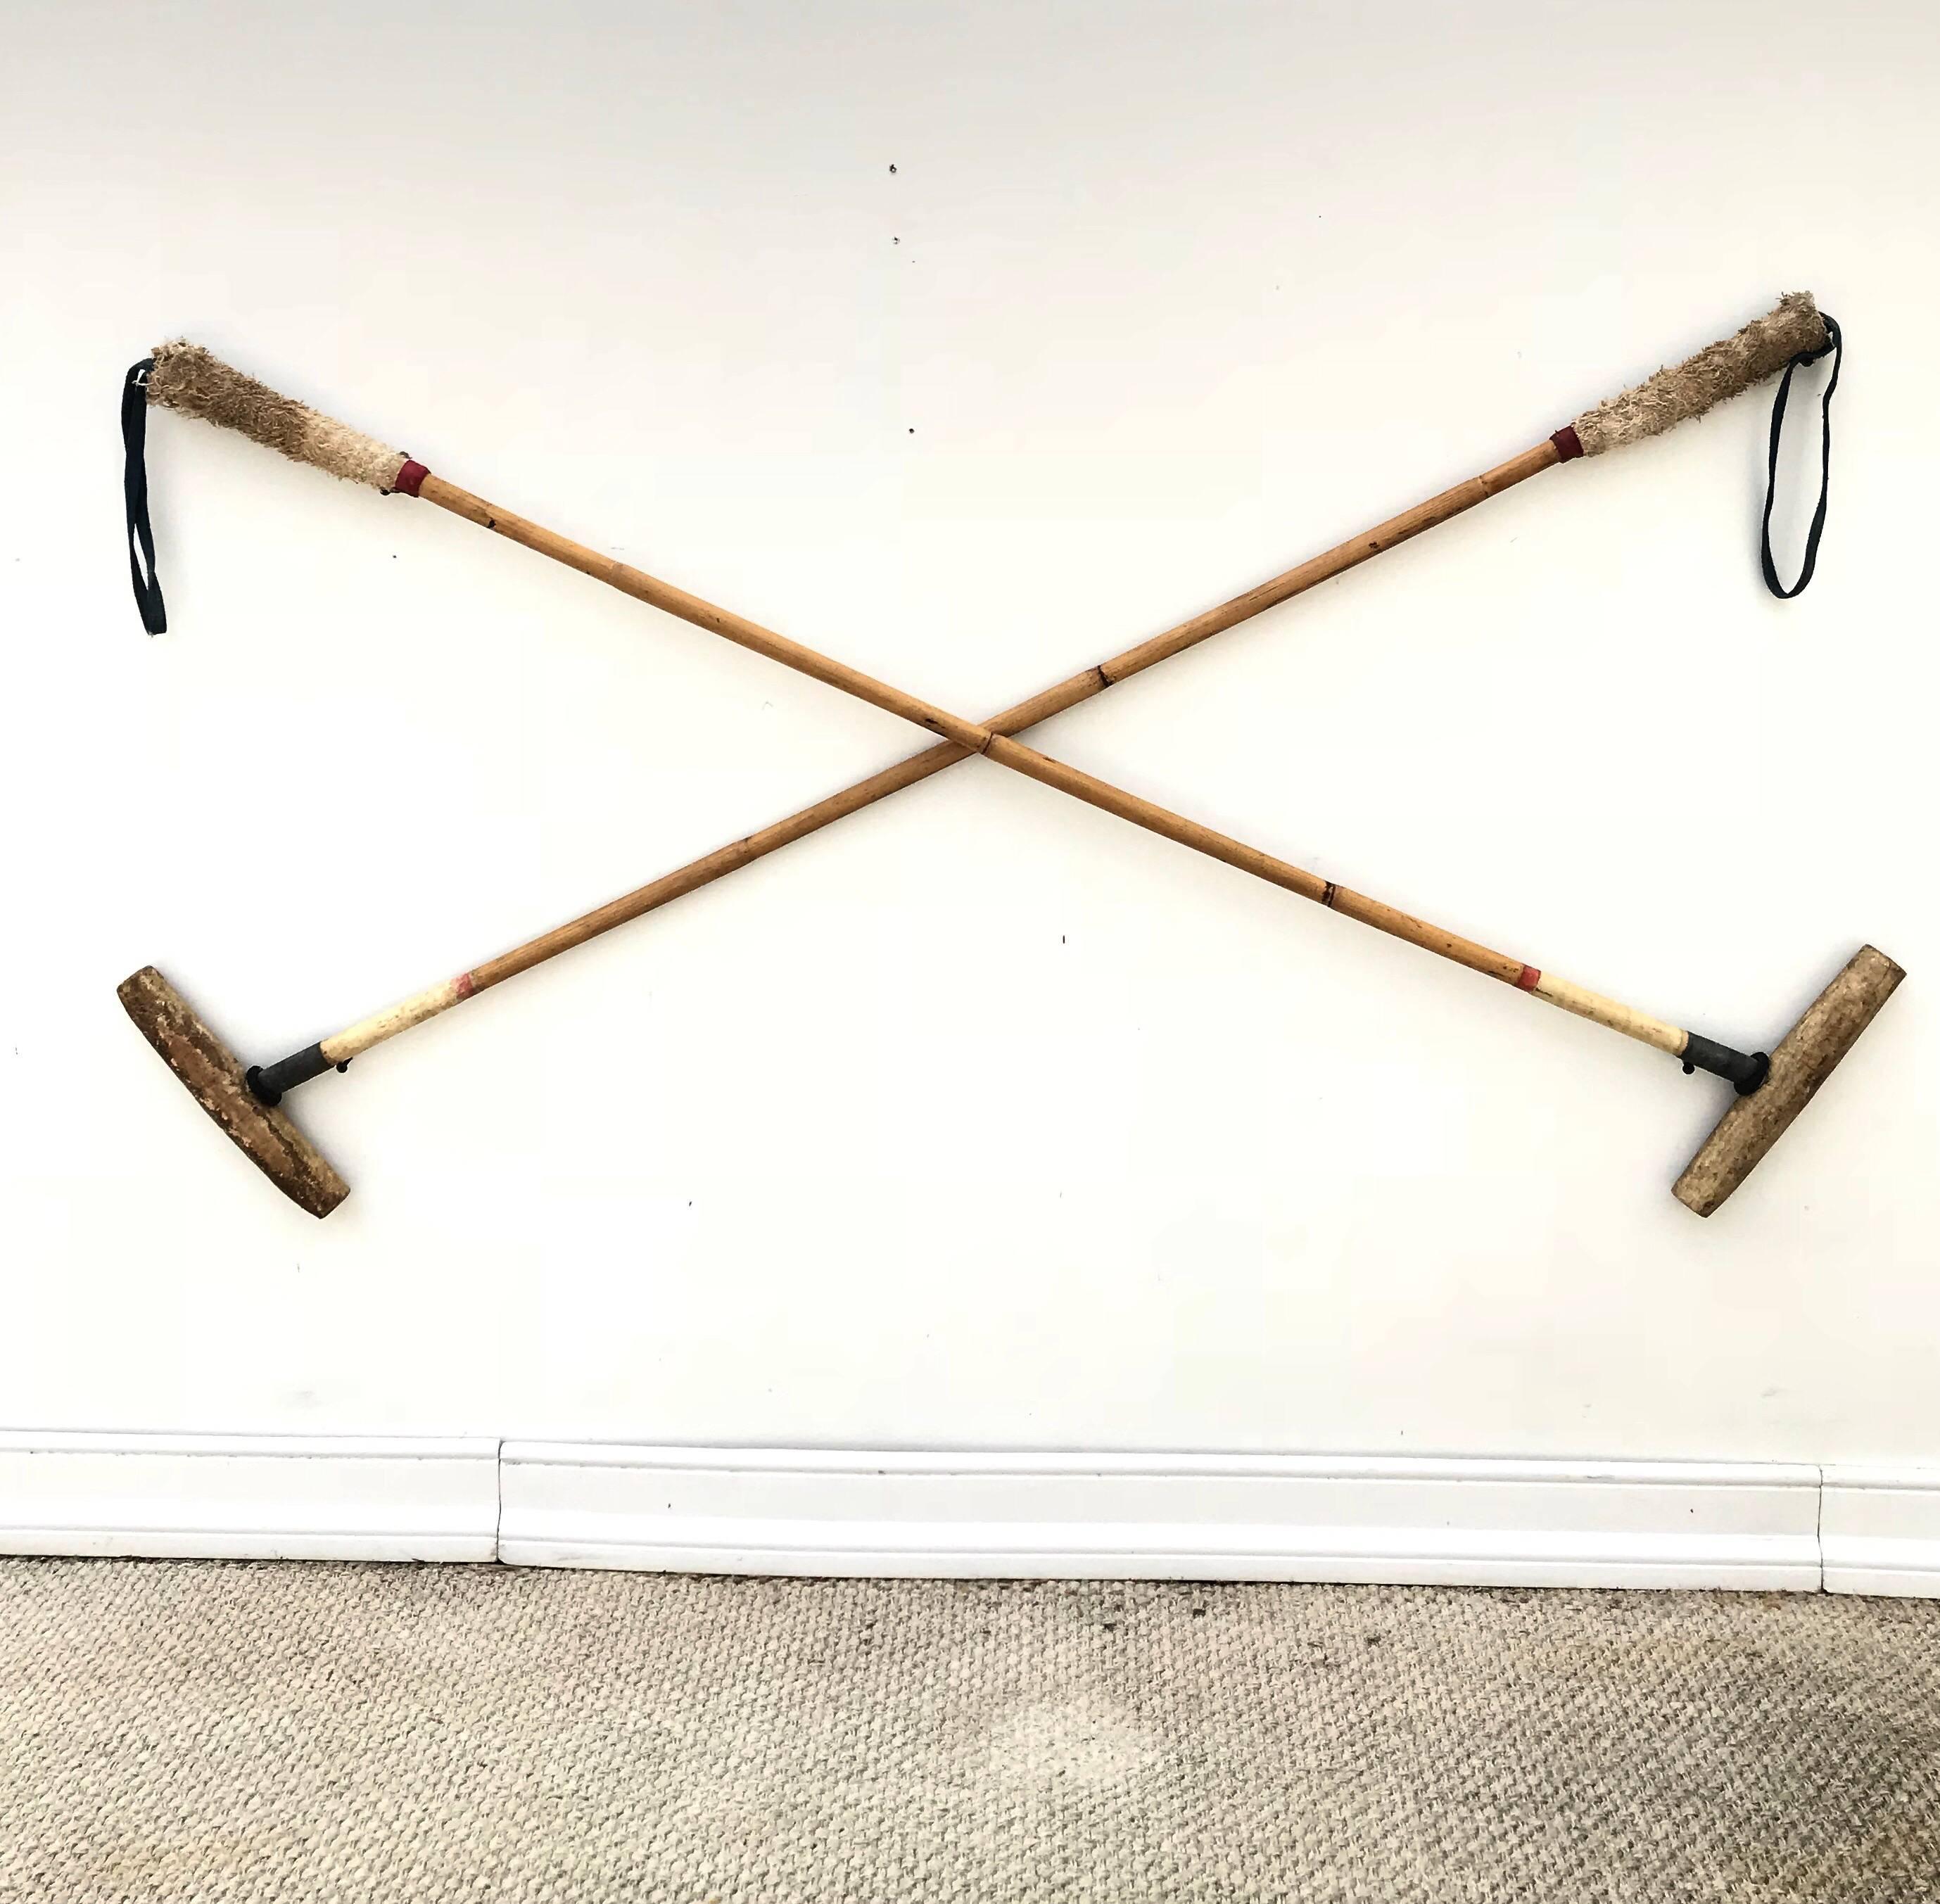 A fetching pair of well used bamboo polo mallets. A wonderful decorative objet for a sporting room.